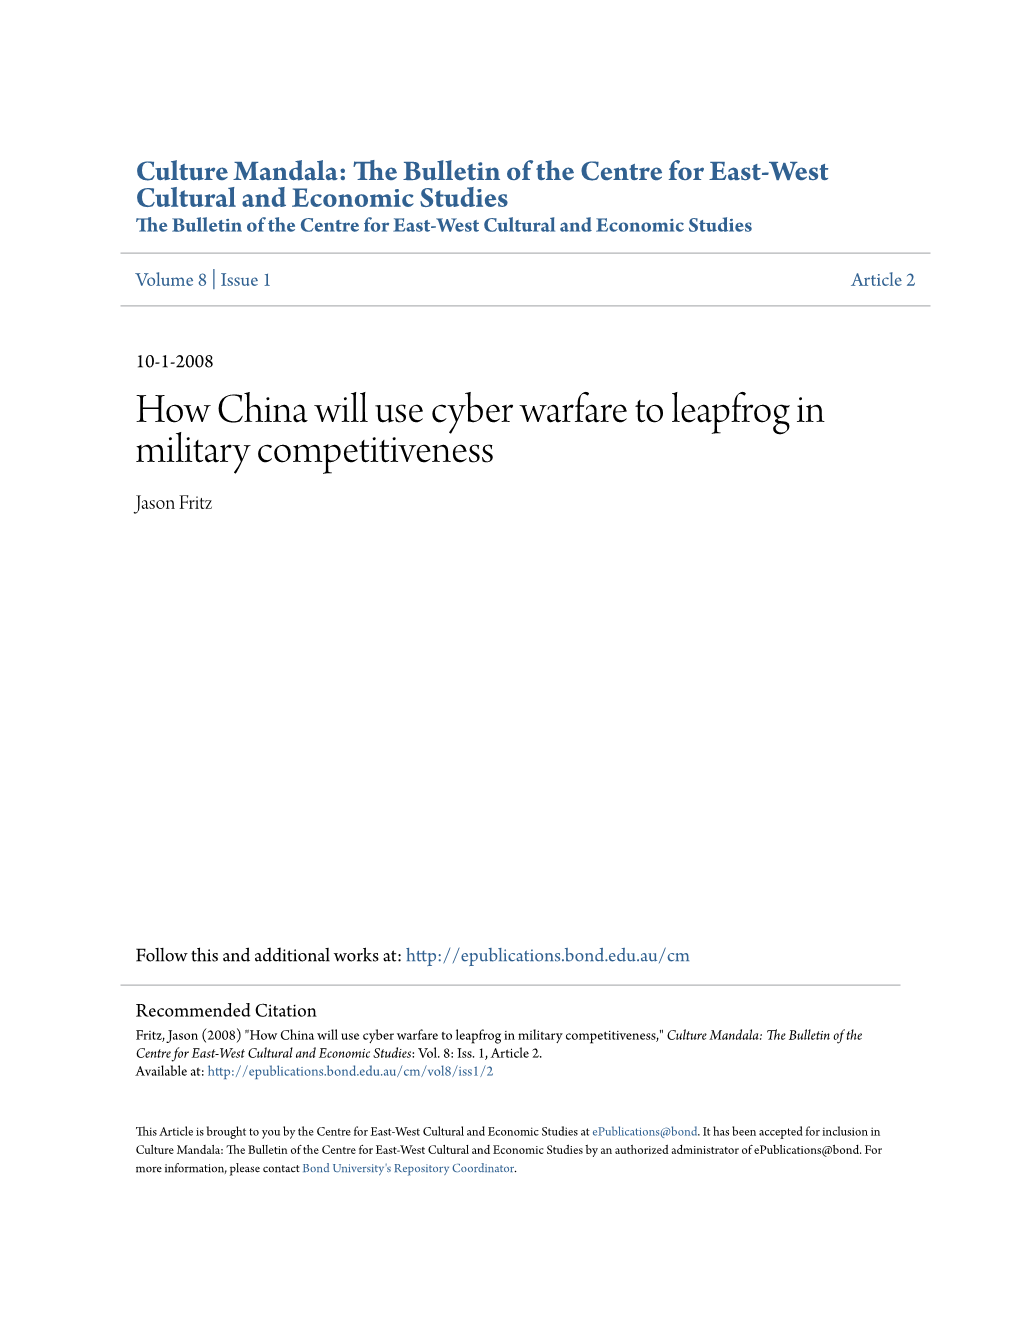 How China Will Use Cyber Warfare to Leapfrog in Military Competitiveness Jason Fritz